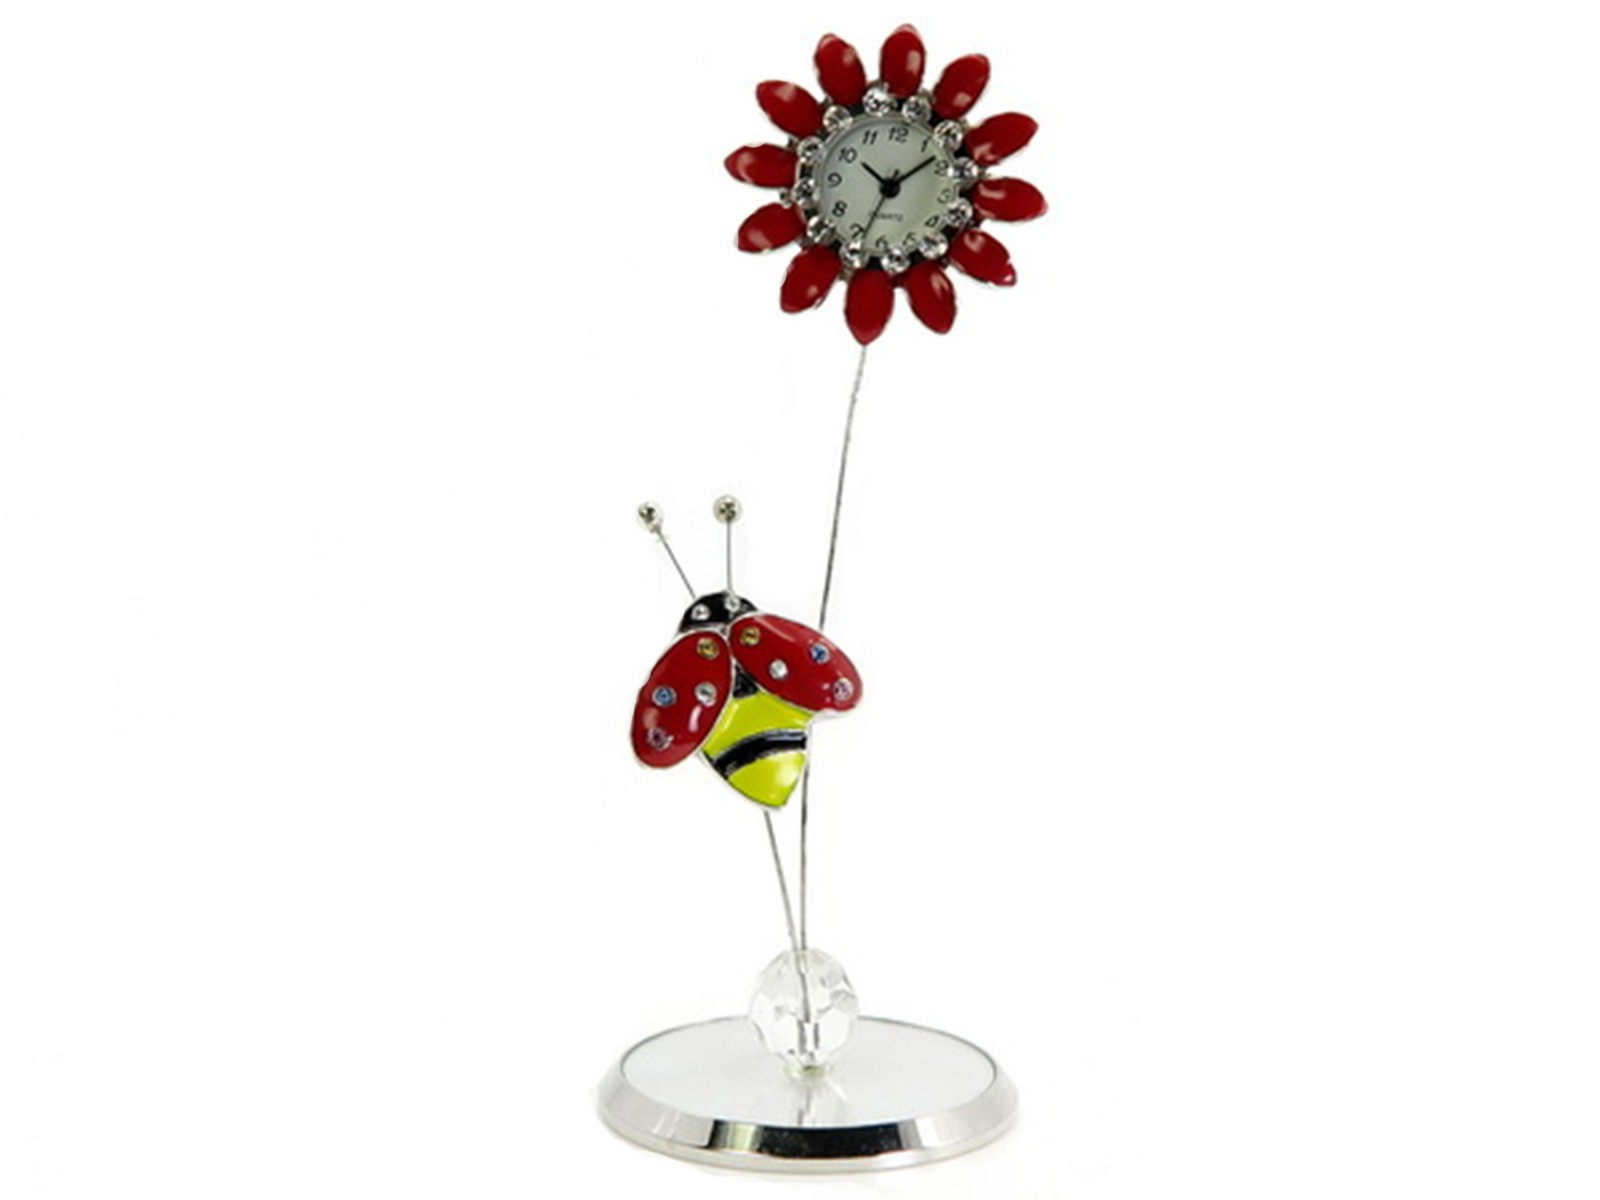 Flower Miniature Clock with Bee